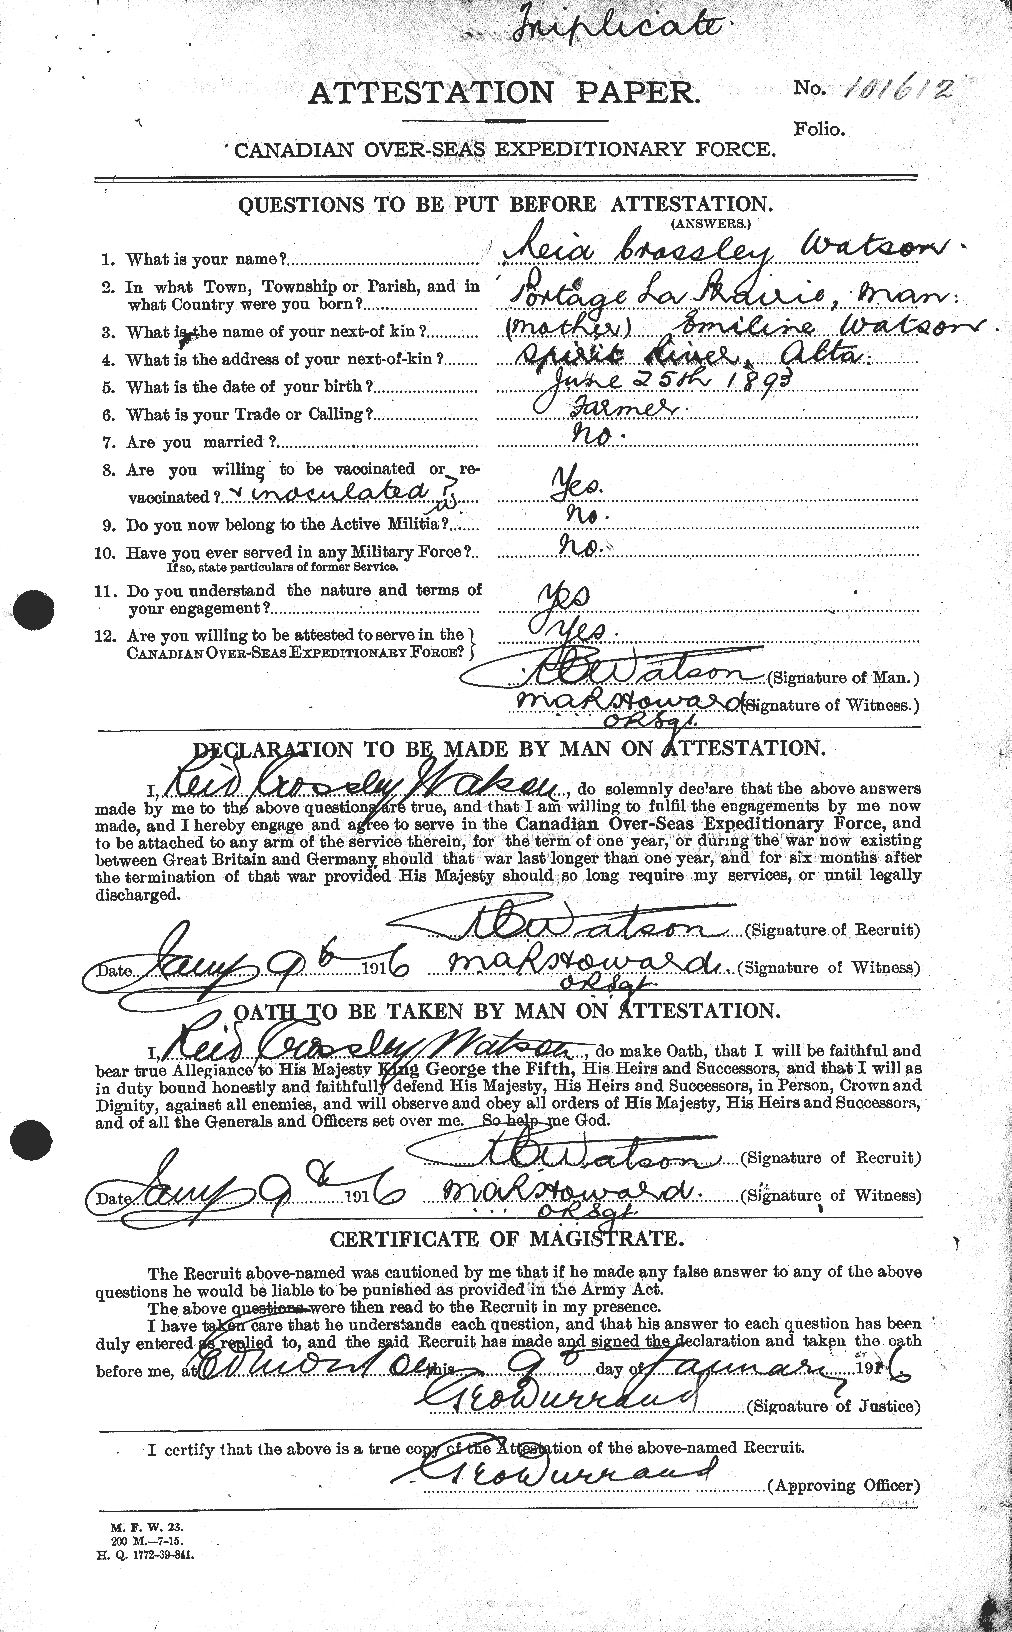 Personnel Records of the First World War - CEF 661179a